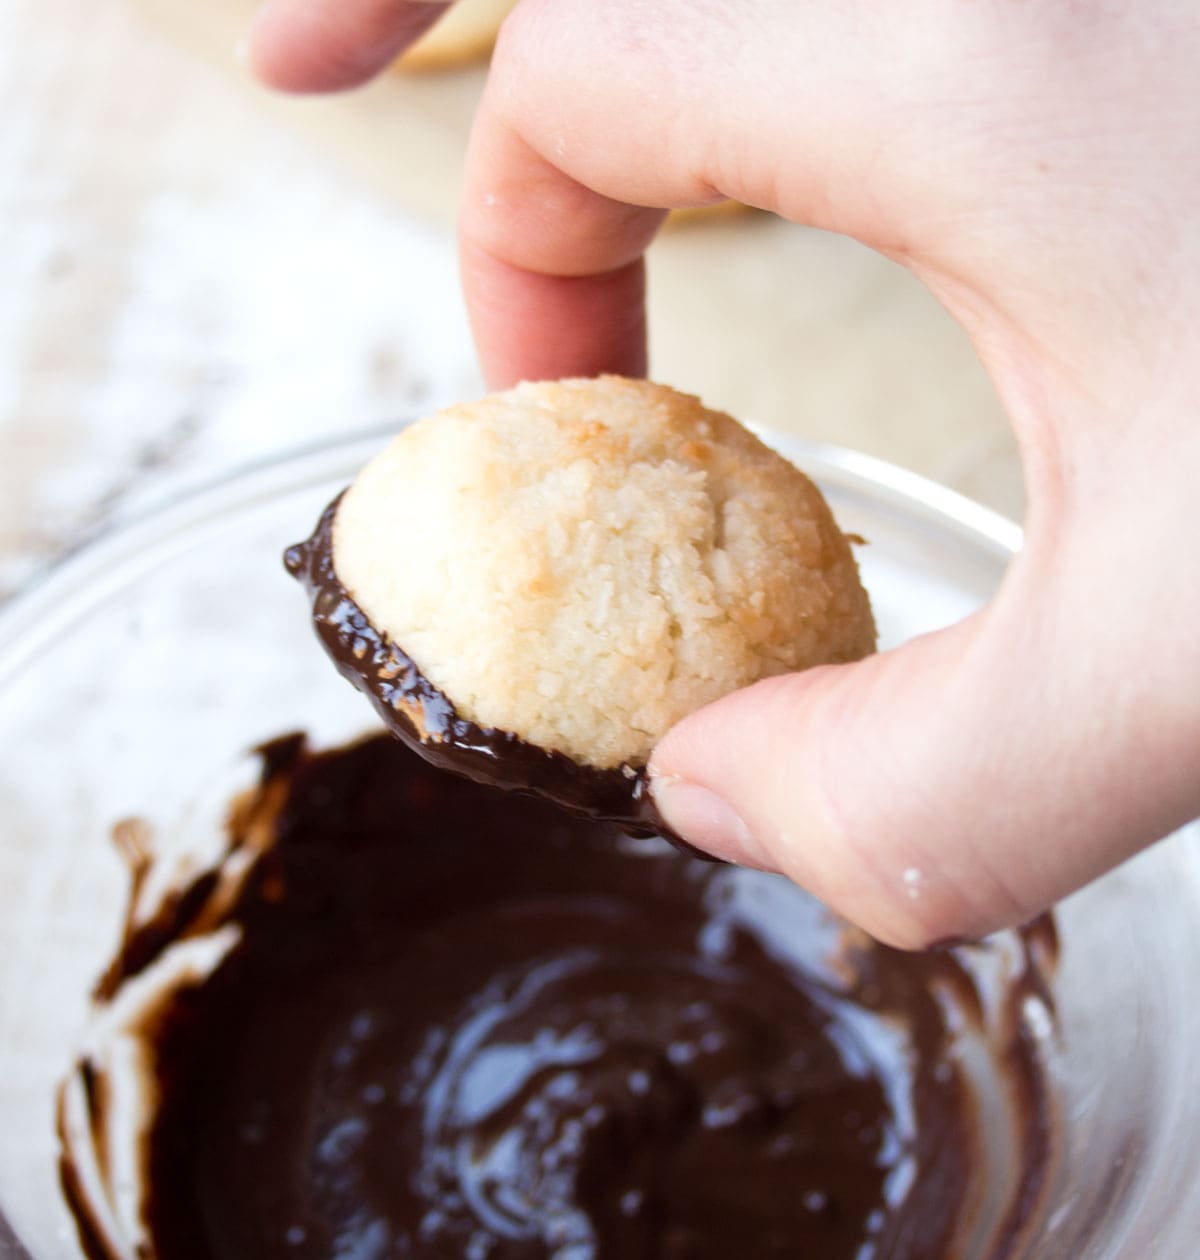 Dipping a macaroon into a bowl with melted chocolate.